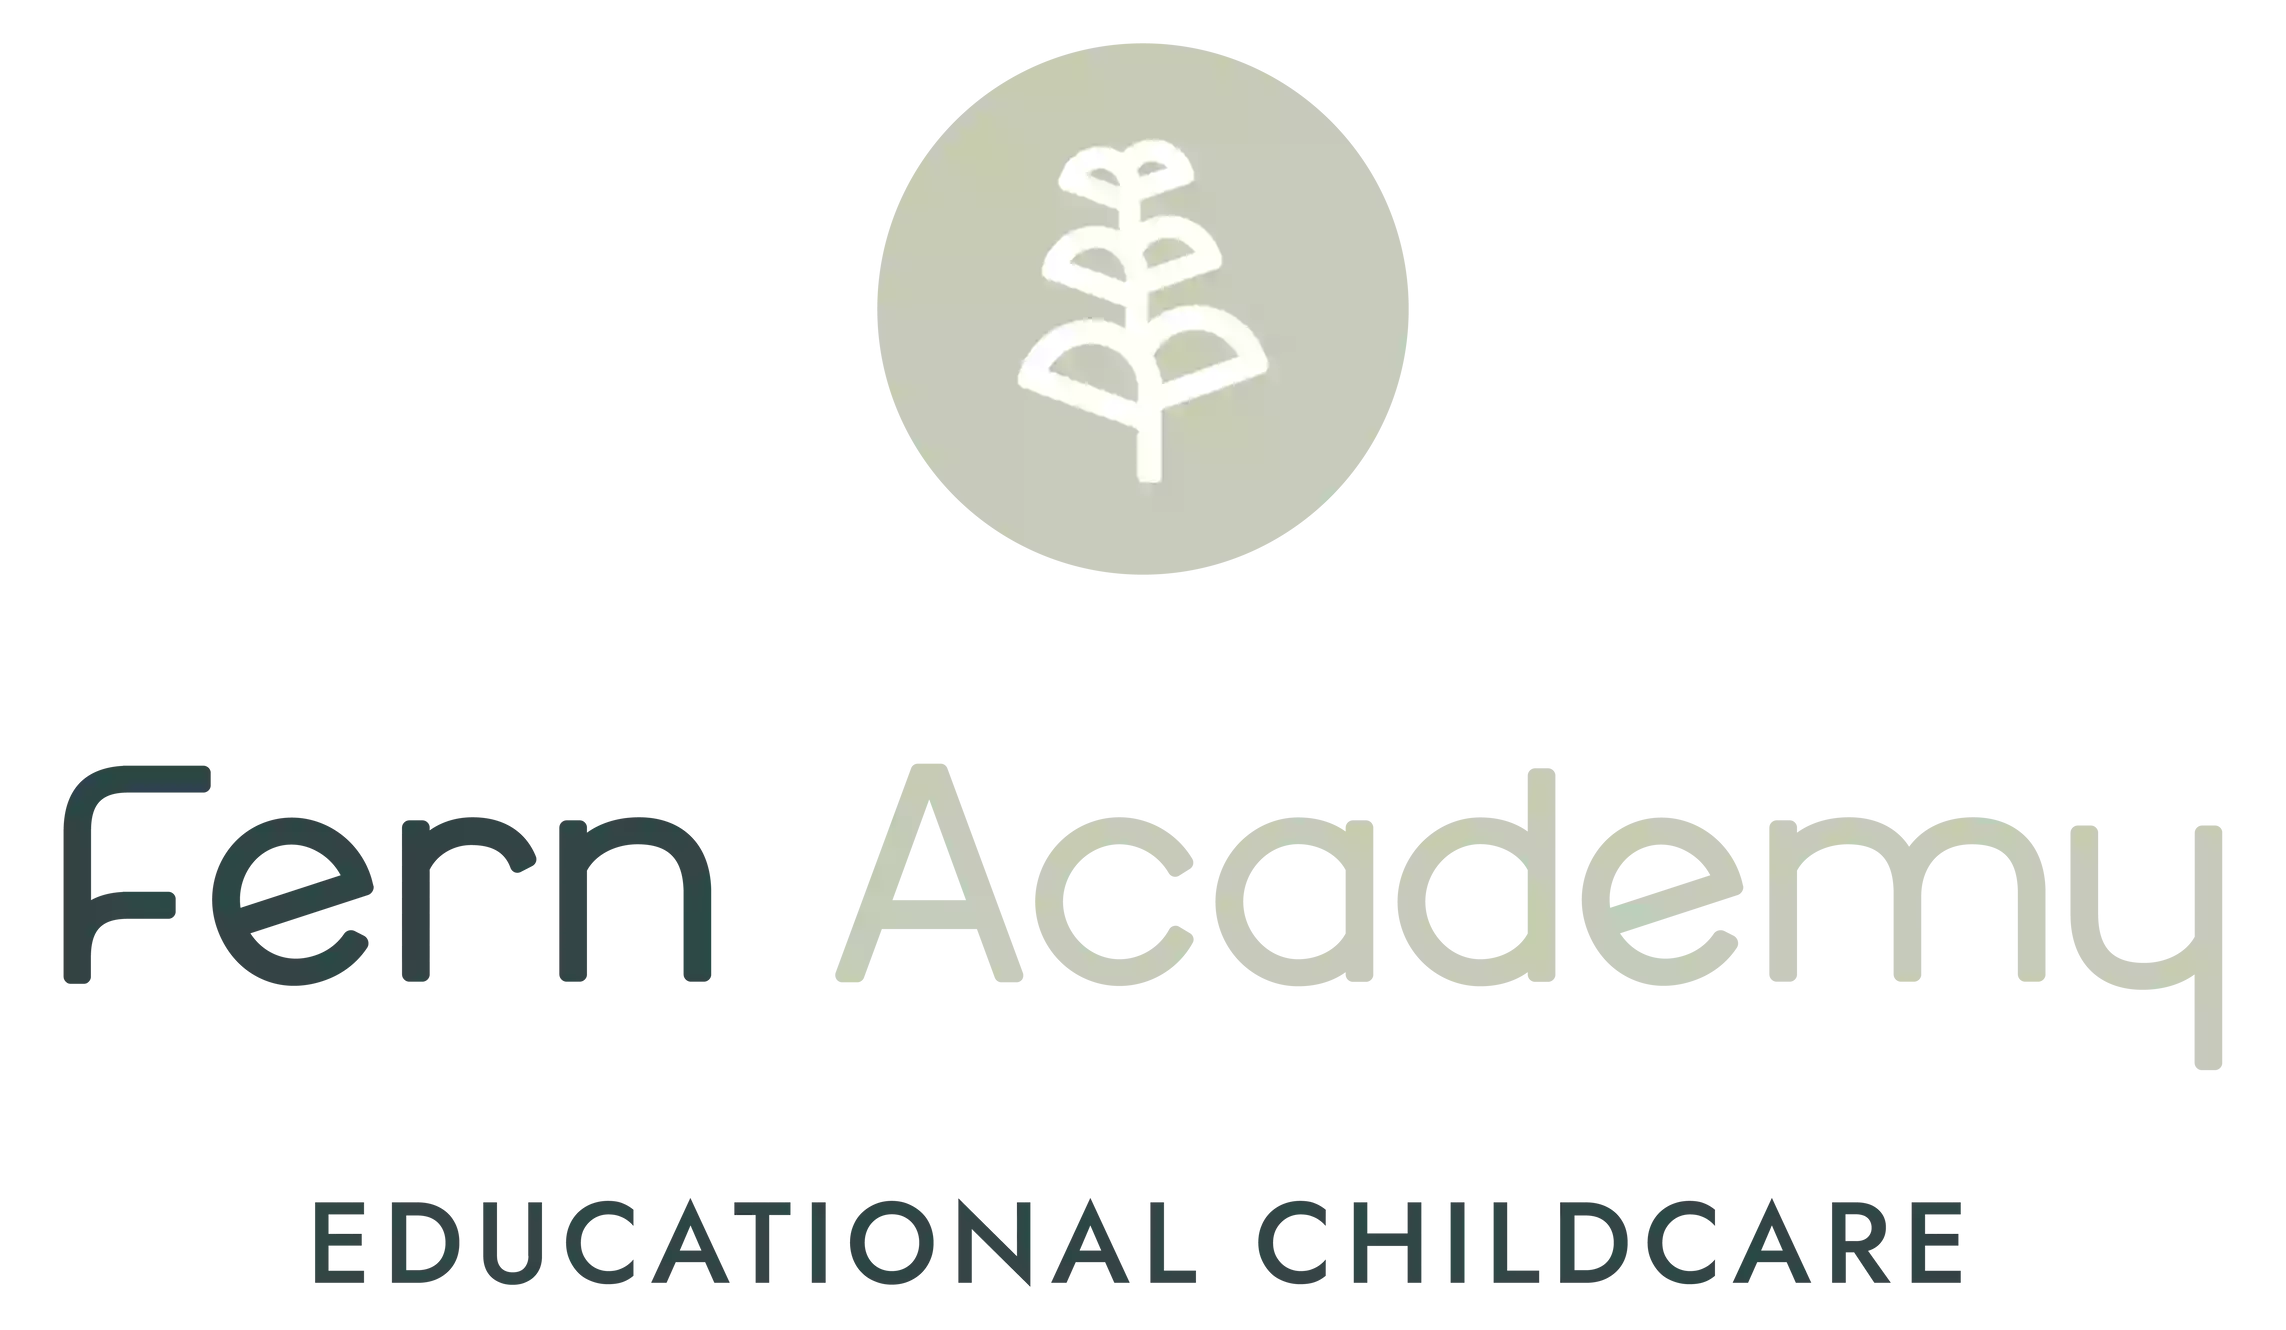 Fern Academy Educational Childcare